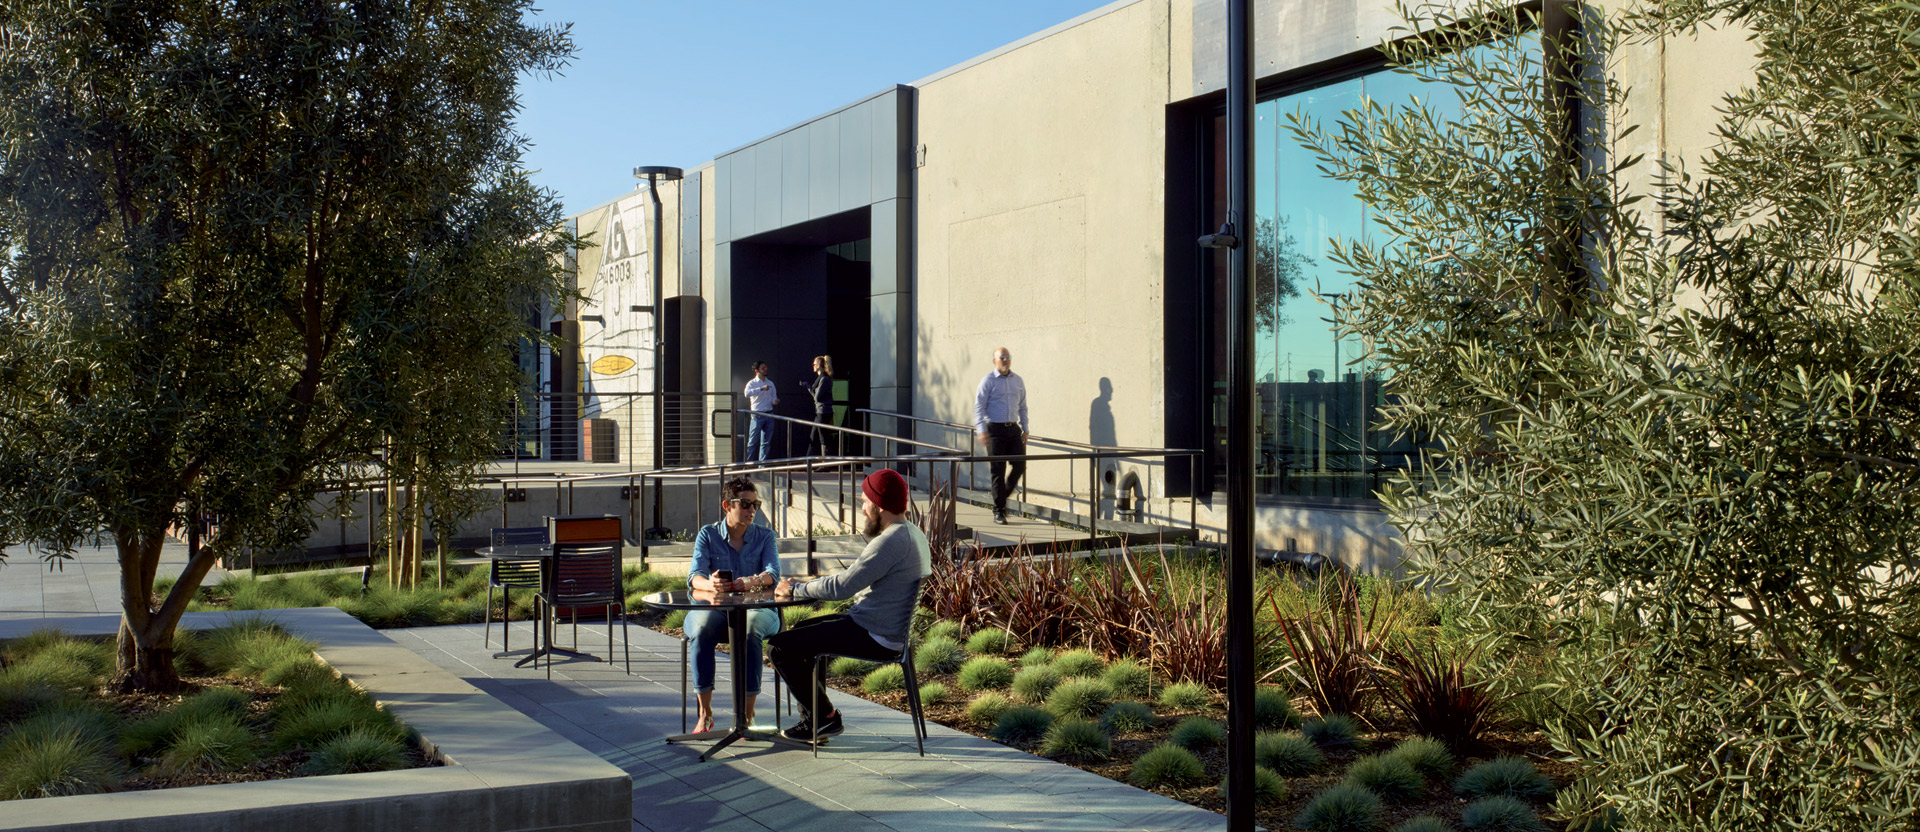 Modern corporate terrace with landscaped garden, featuring drought-resistant plants and a minimalist concrete bench. Employees engage in a casual meeting, showcasing the space's functionality and integration with nature for worker wellbeing.